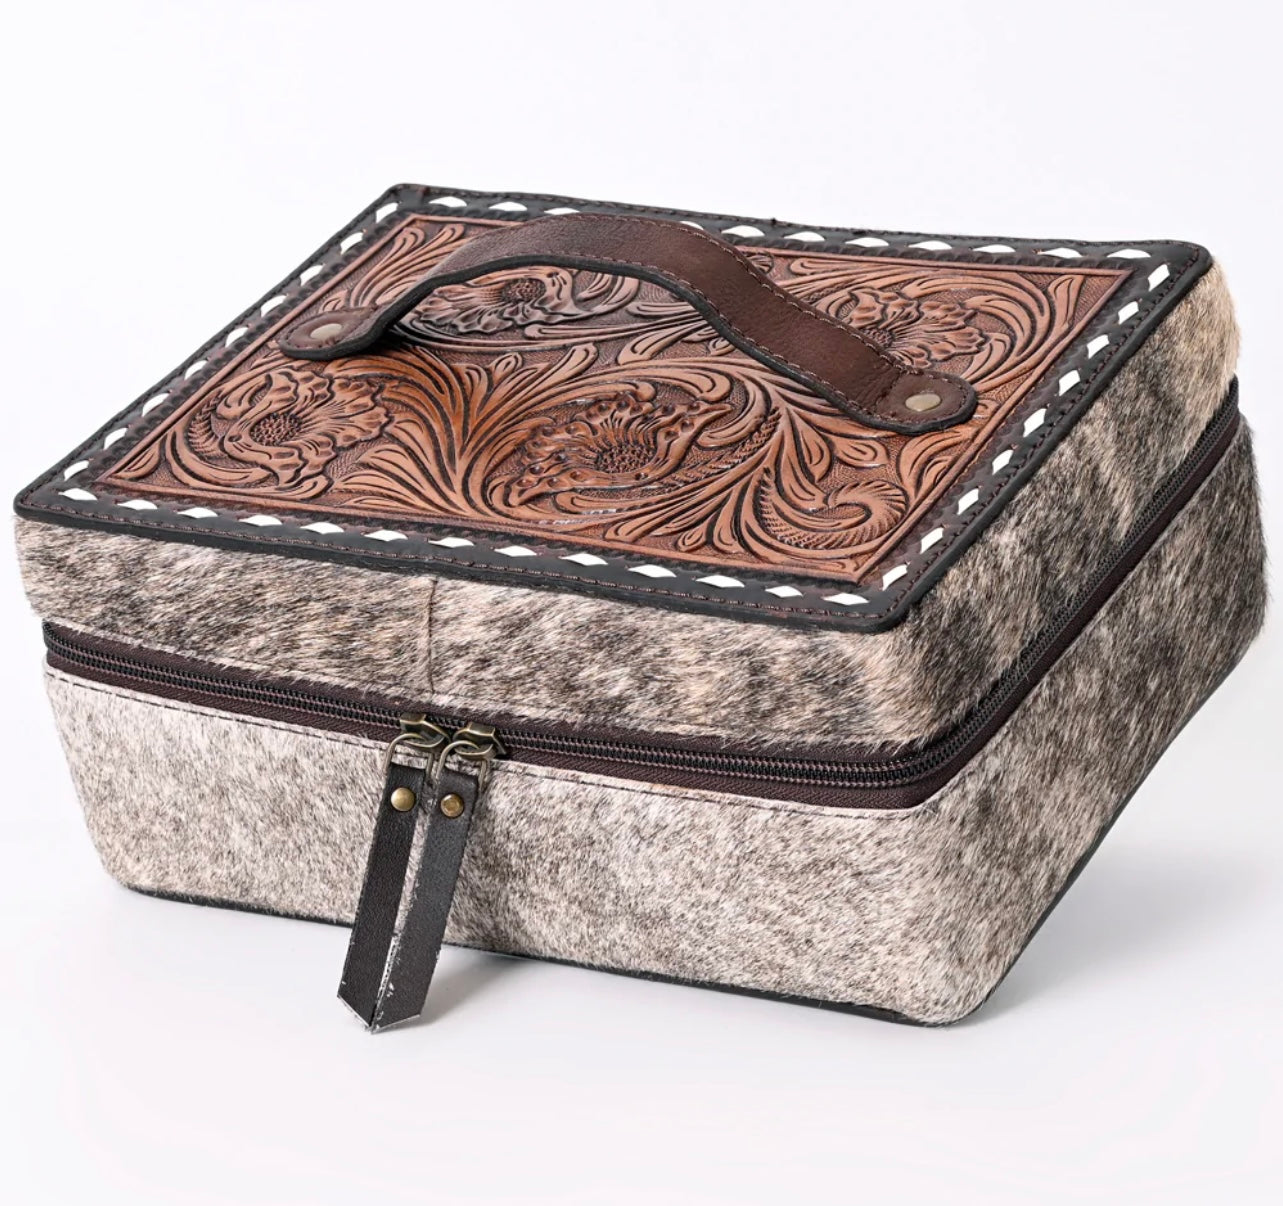 Leather Tooled Teal Inside Jewelry Travel Case